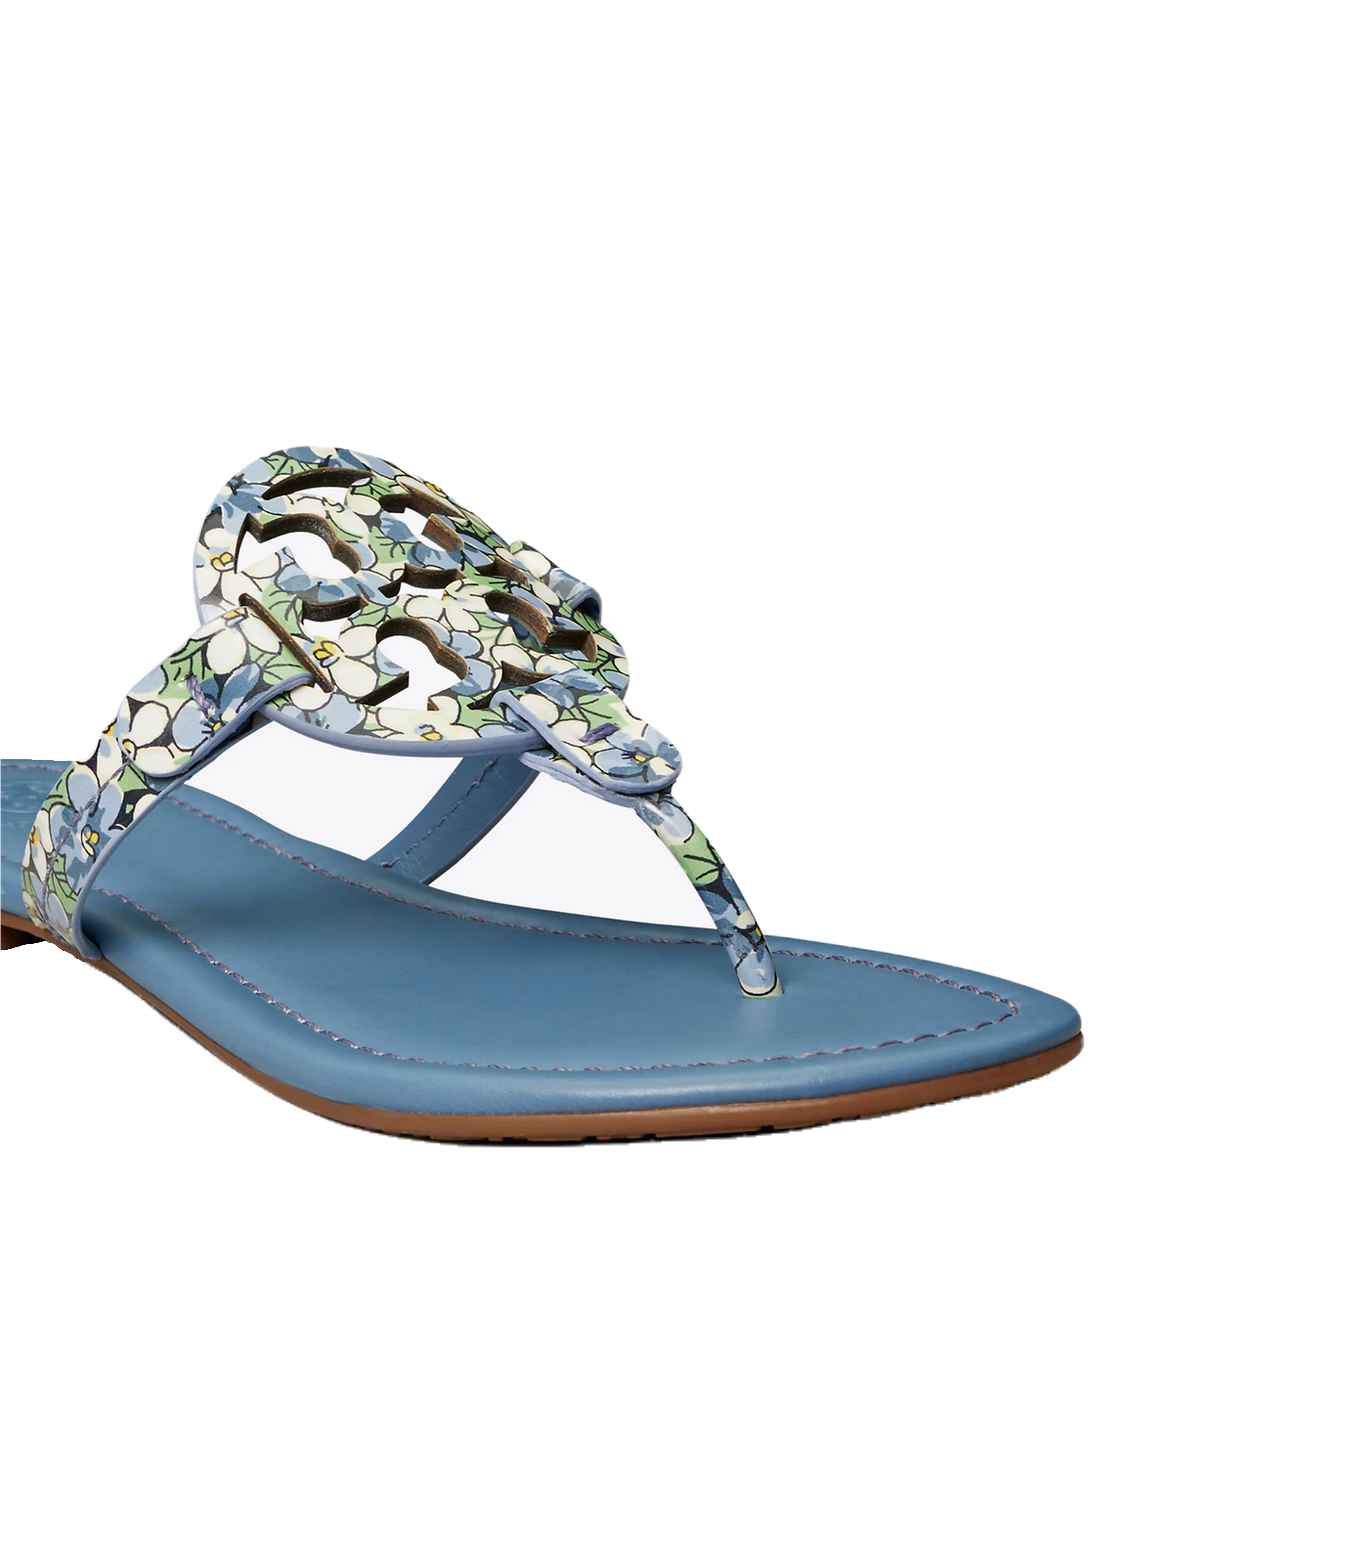 CK & CO | PRINTED PATENT LEATHER MILLER SANDAL - CK & CO